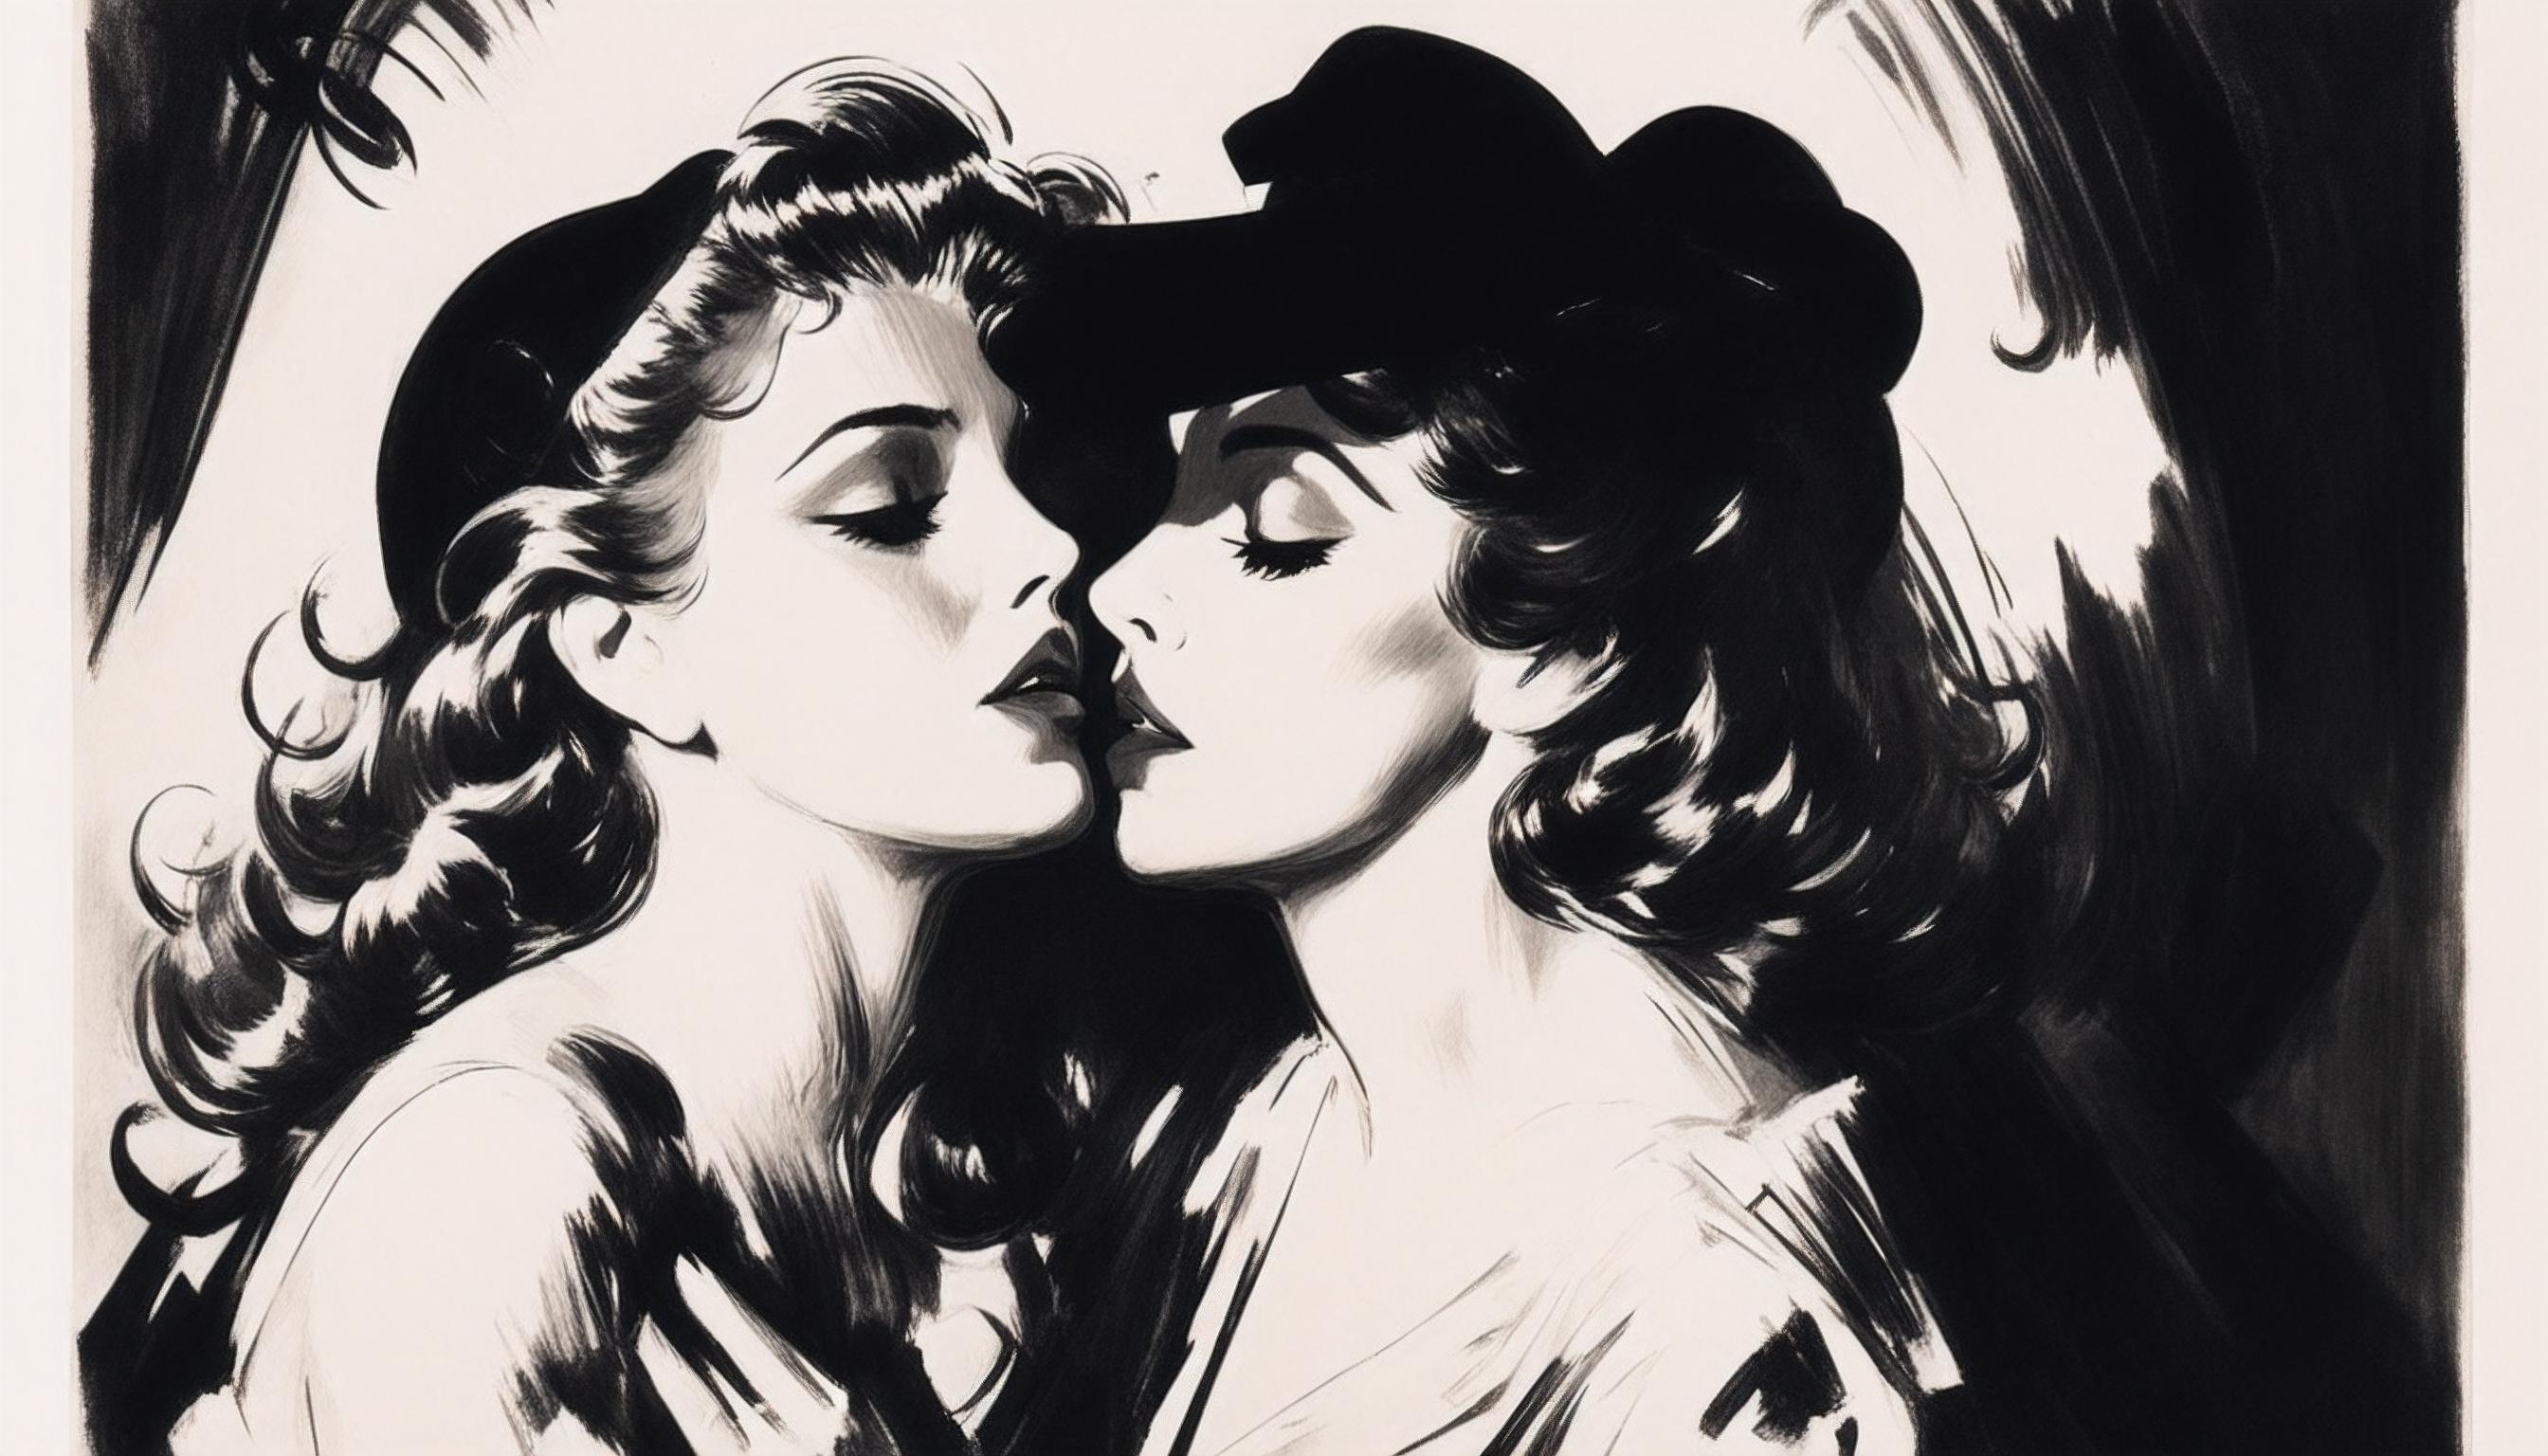 A black and white drawing of a woman kissing another woman with a hat on.